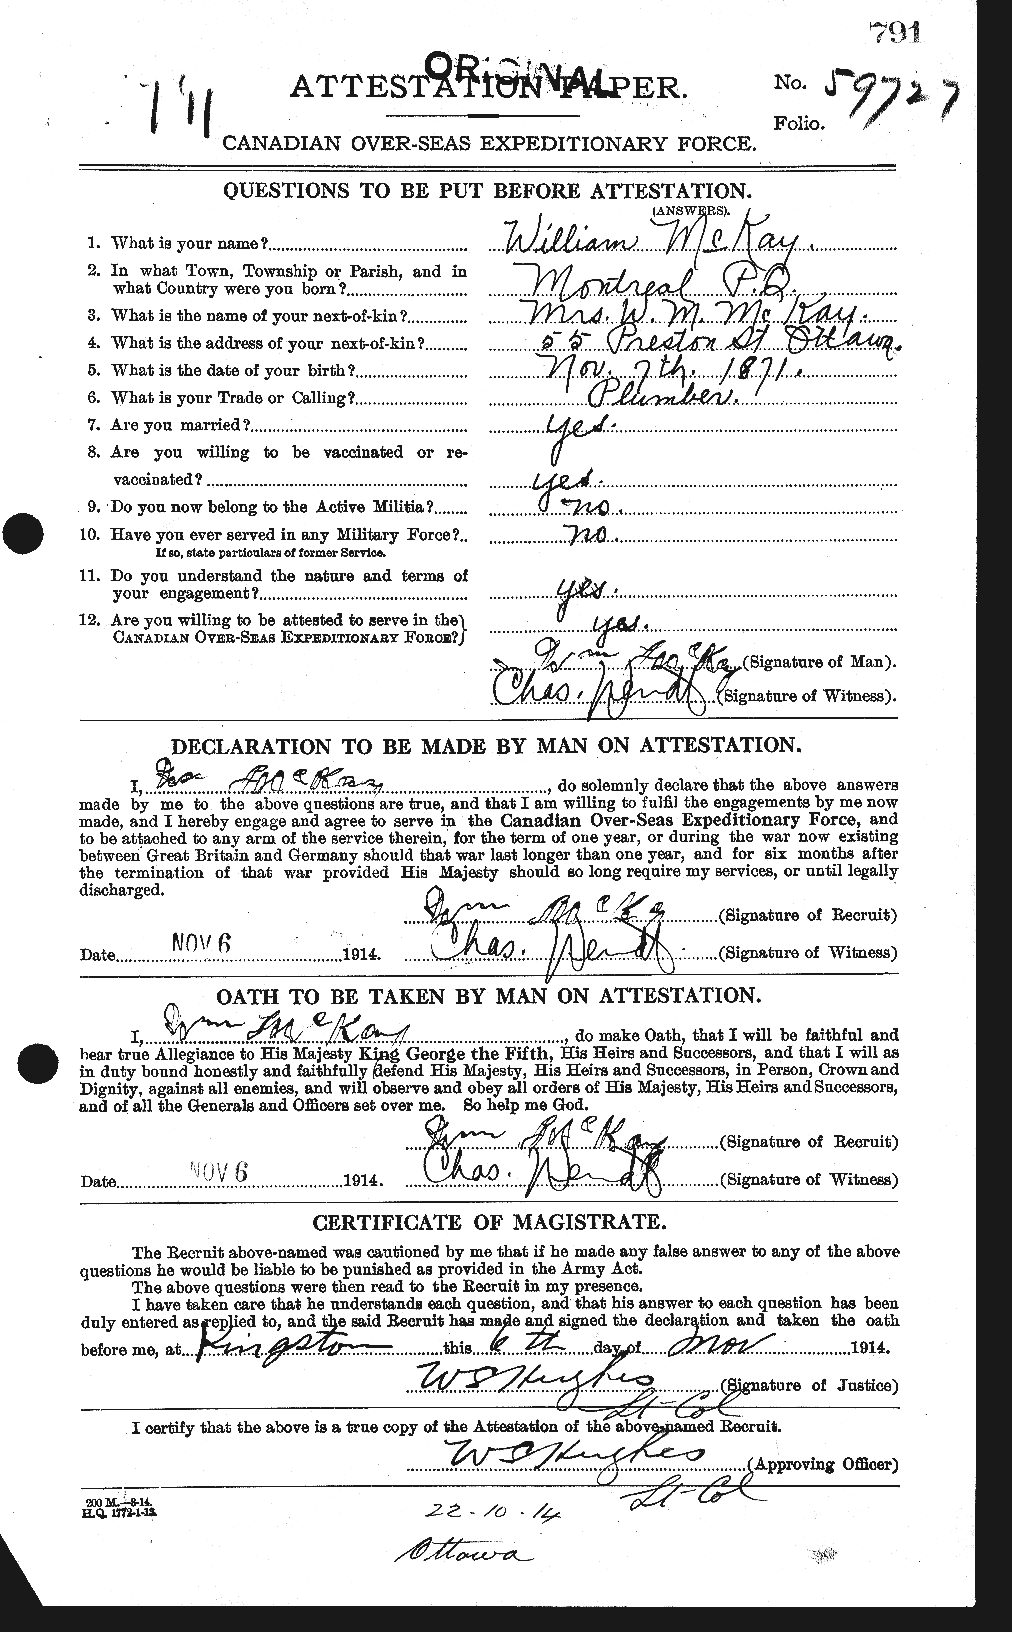 Personnel Records of the First World War - CEF 530213a